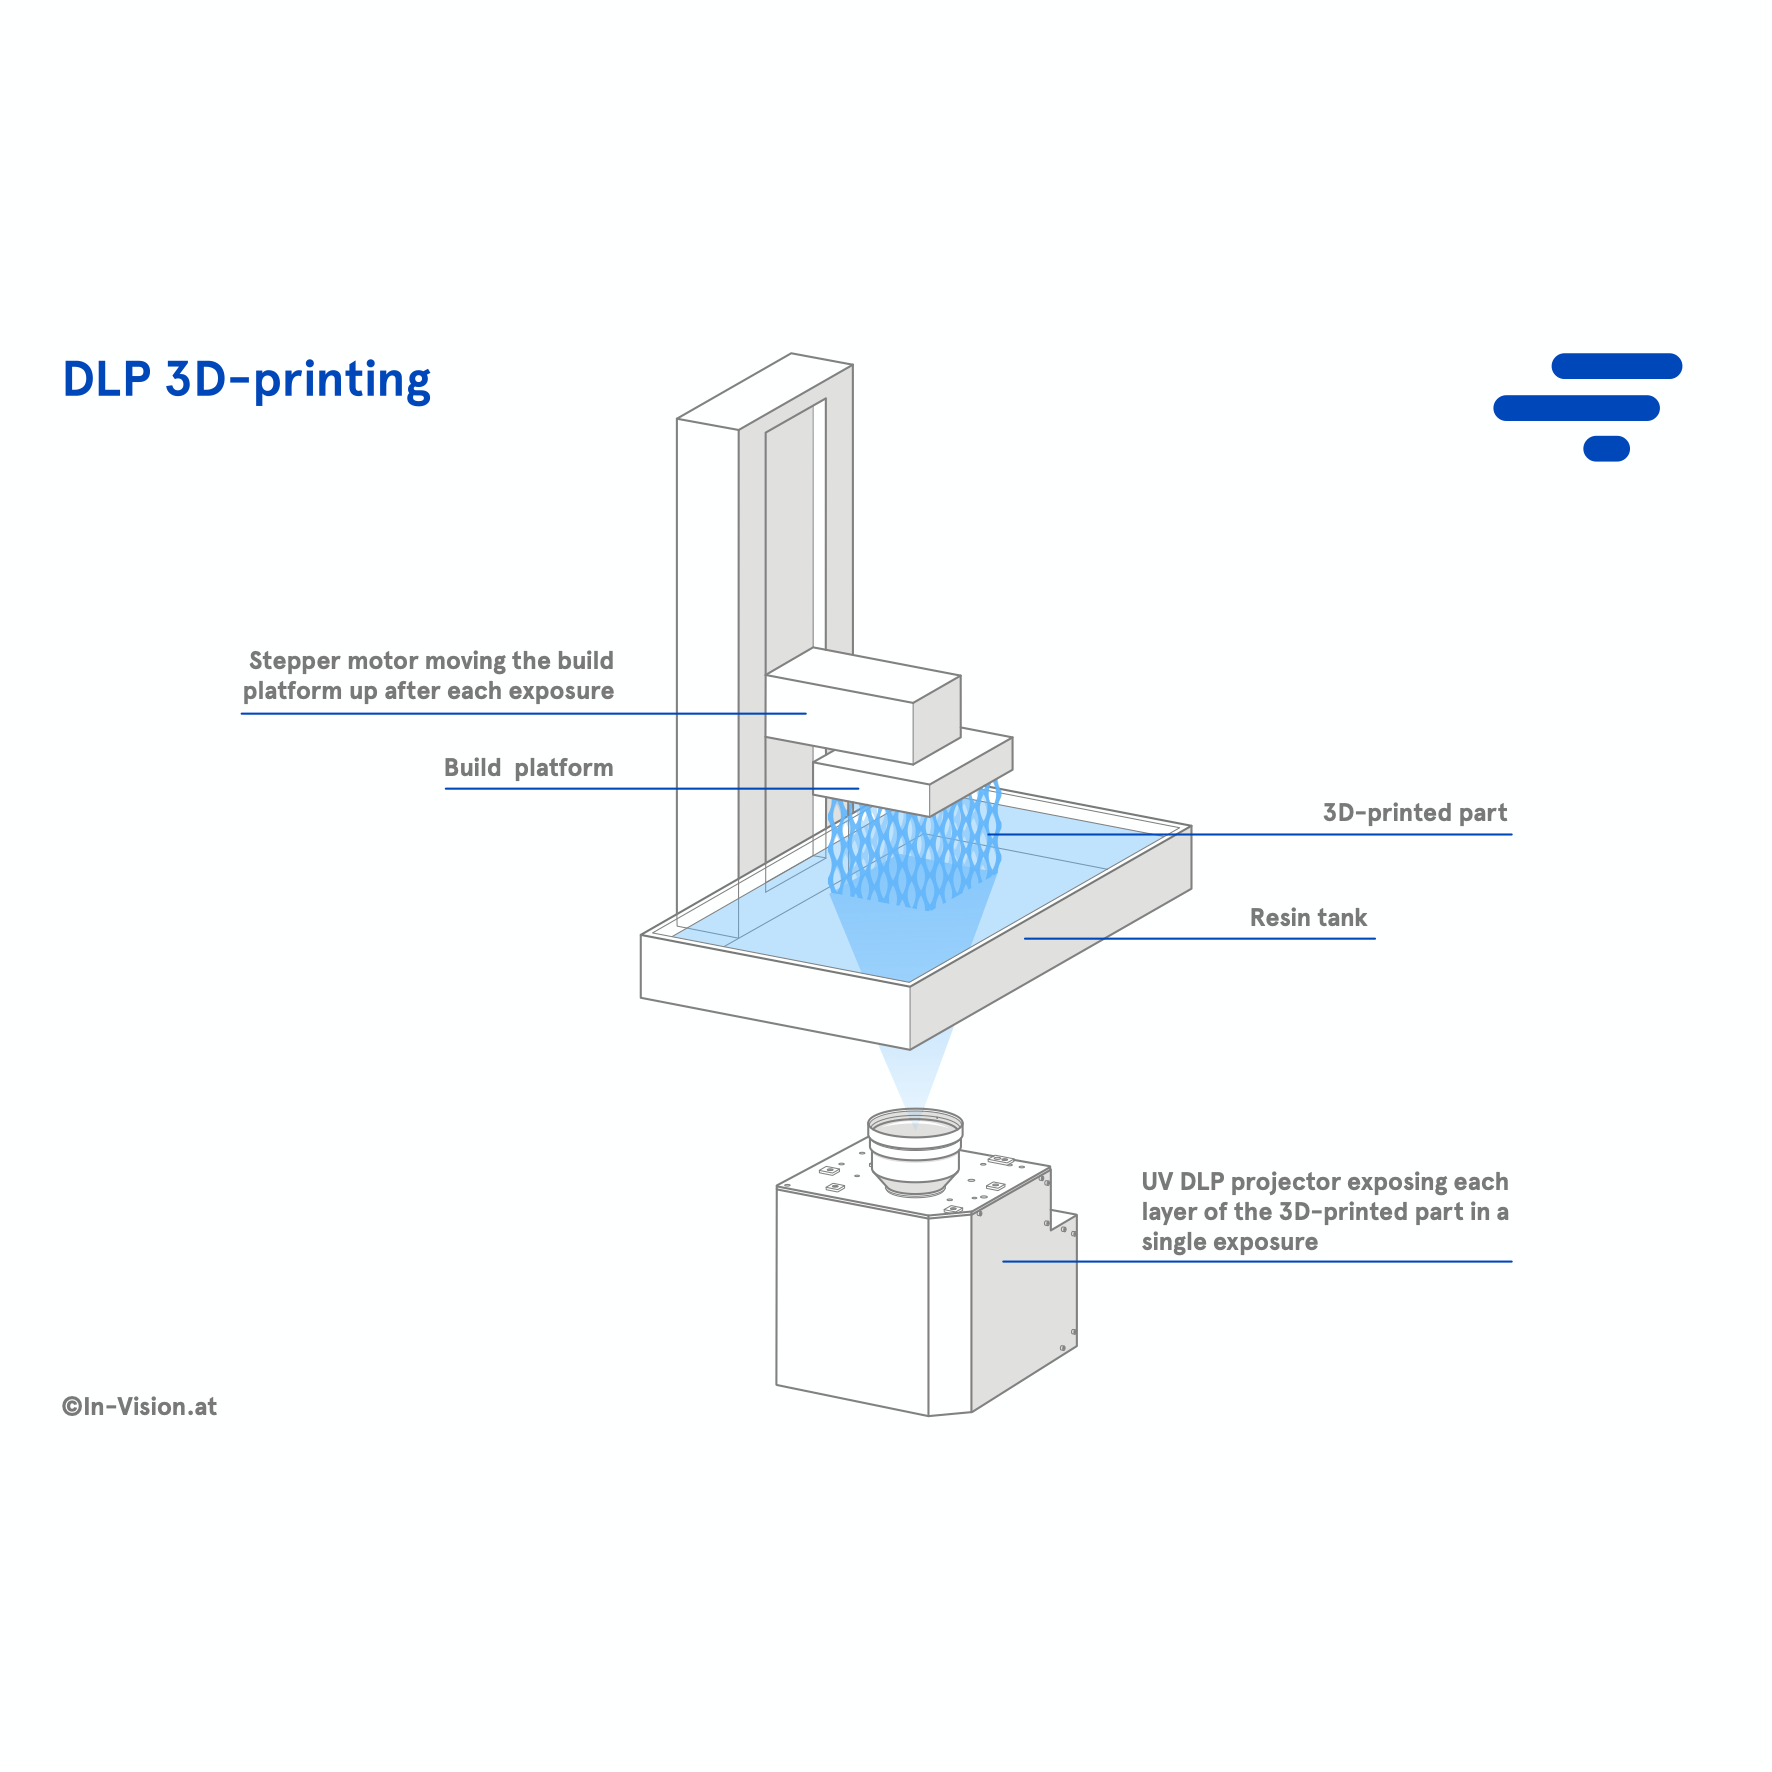 Basic principle of DLP 3D-printing. A UV projector projects an image onto the photopolymer bed and cures each layer of the object image after image.